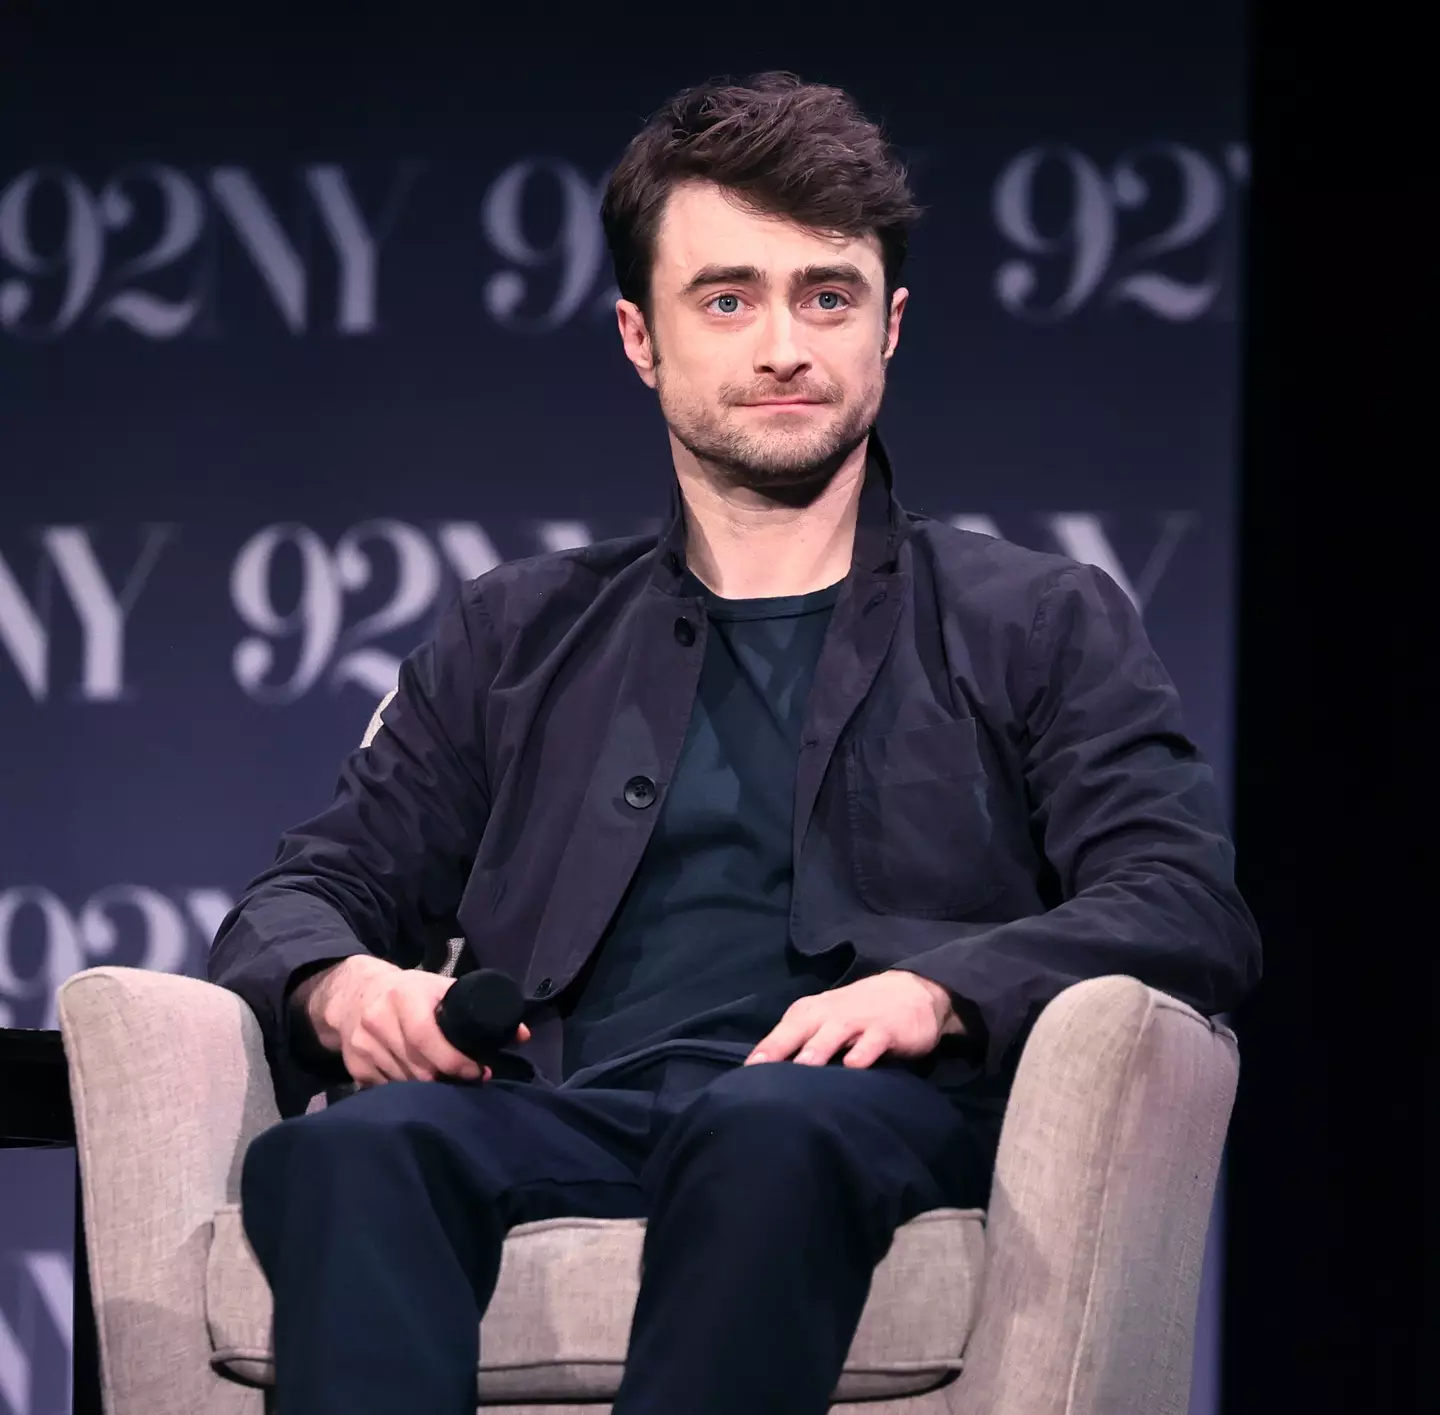 Daniel Radcliffe addressed 'owing' his success to JK Rowling. (Theo Wargo/Getty Images)